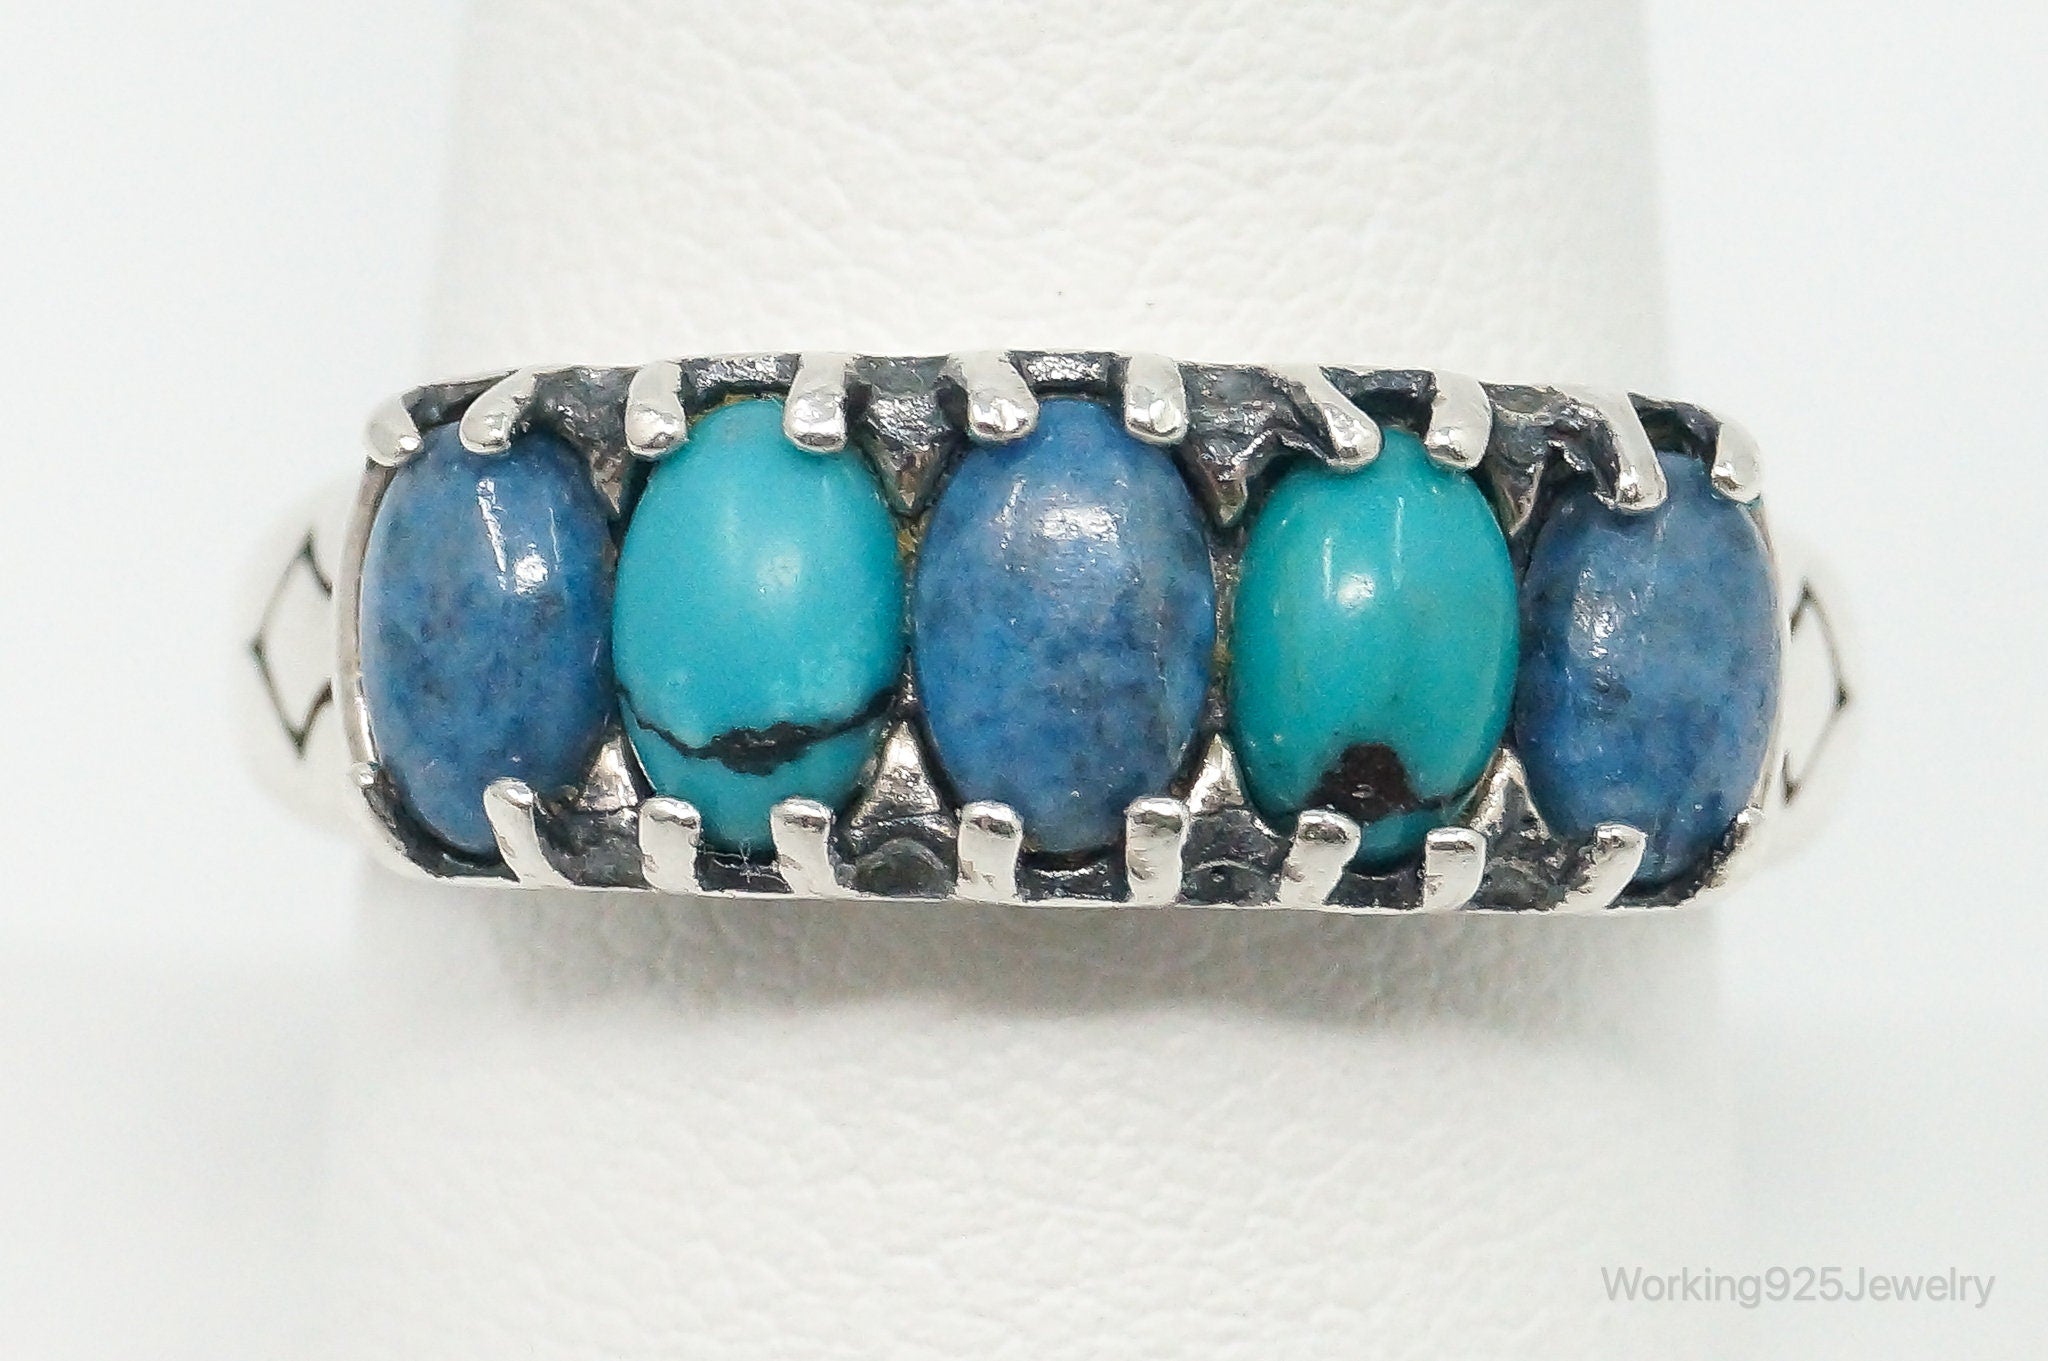 Southwestern Carolyn Pollack Turquoise Lapis Lazuli Sterling Silver Ring Size 9